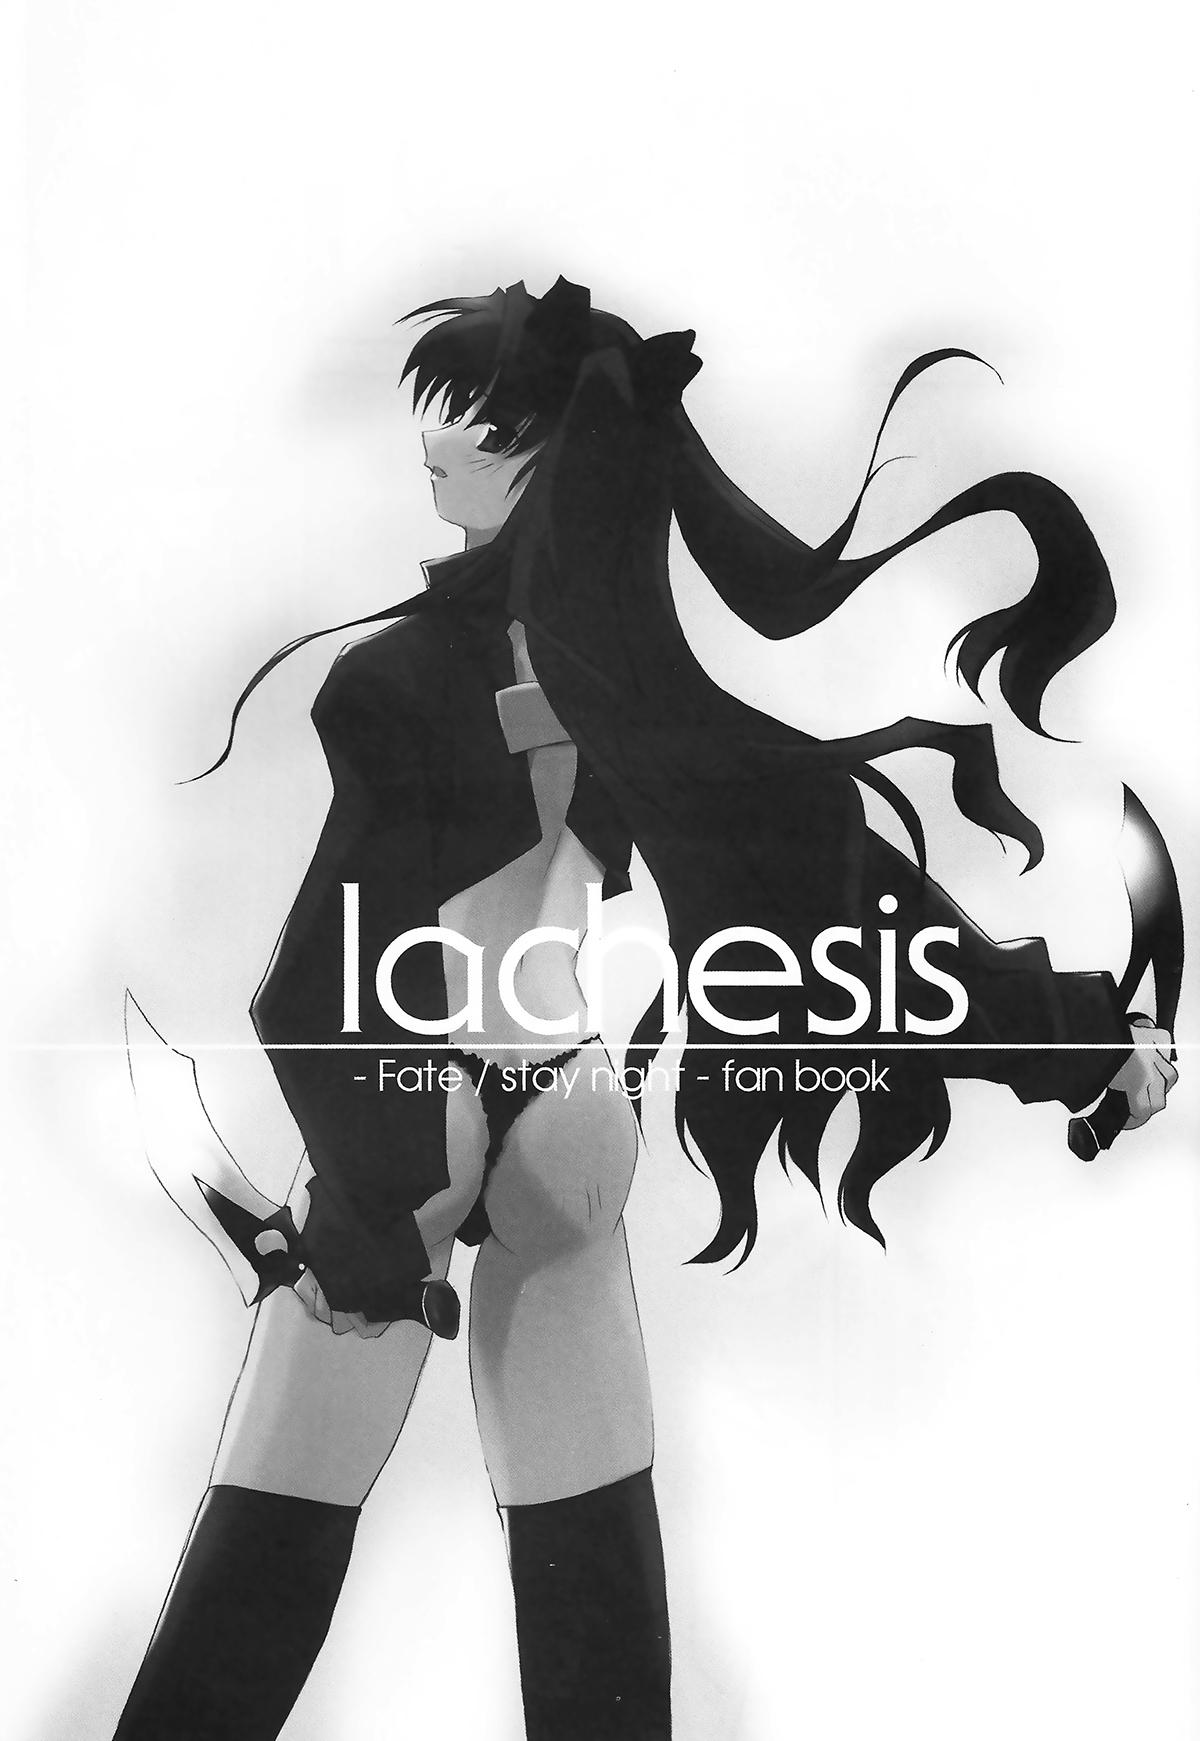 Indo lachesis - Fate stay night Mas - Page 2